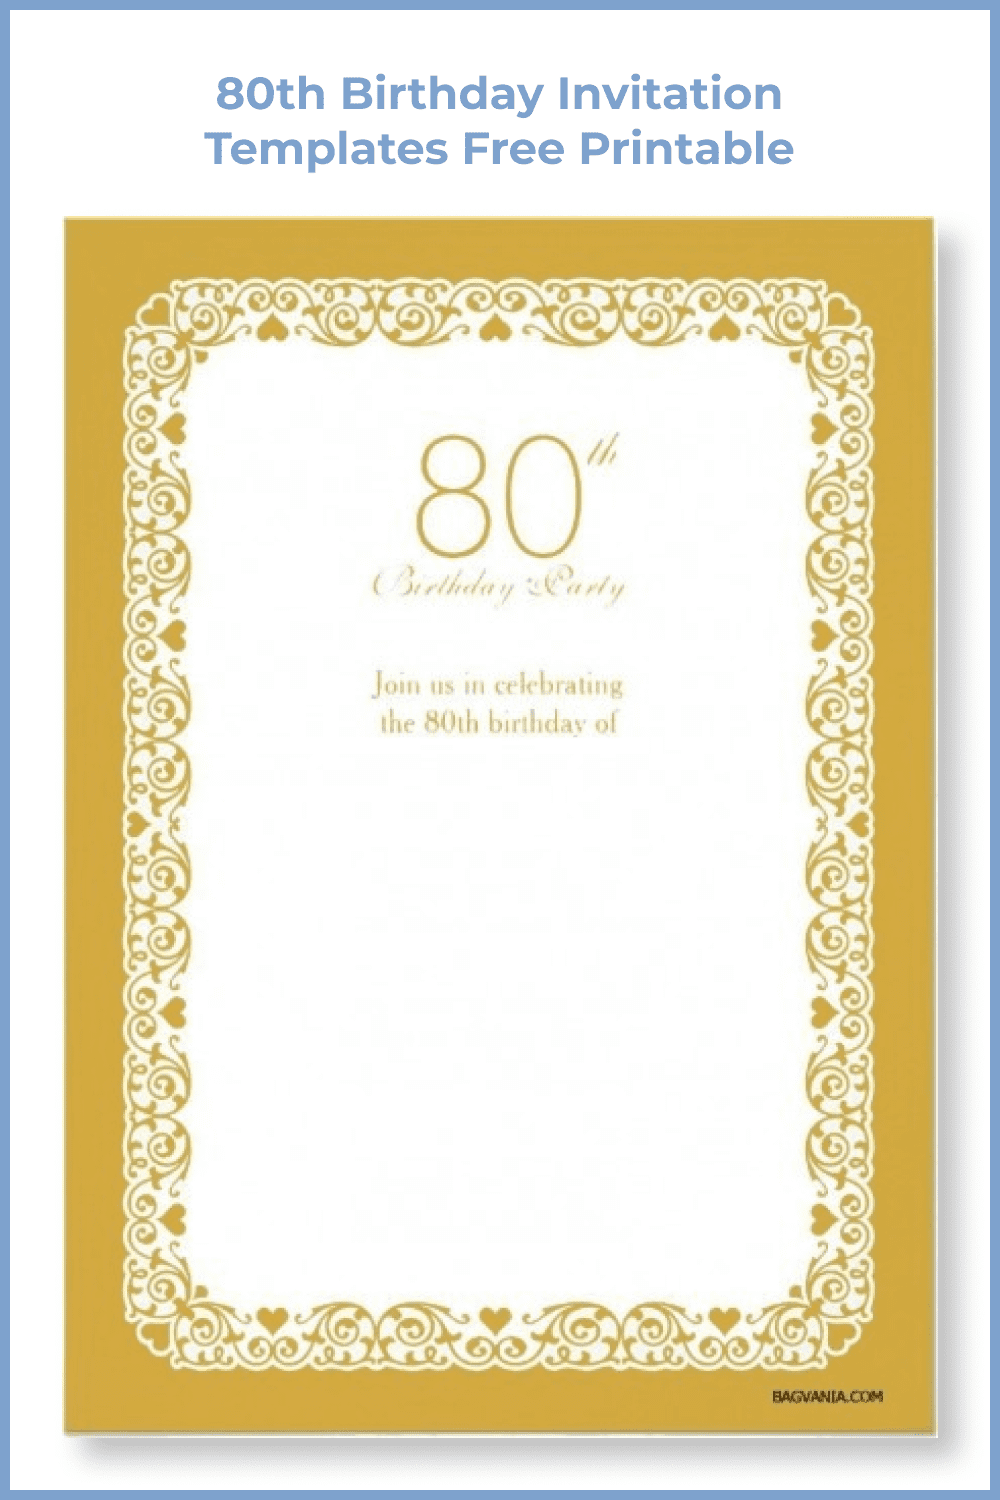 Royal style invitation with gold frill.